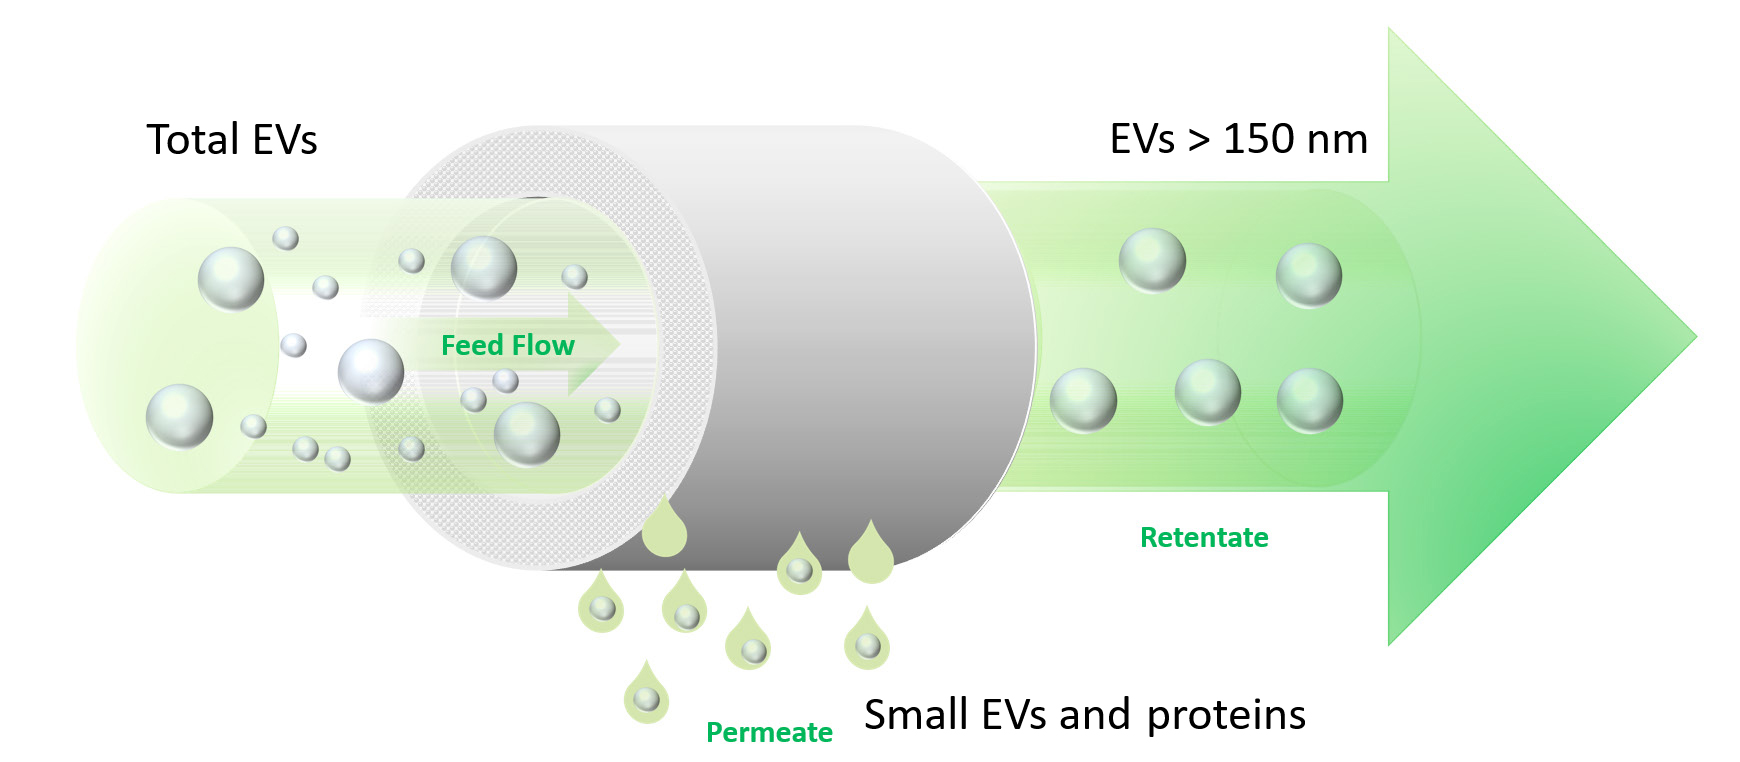 TFF-MV: Separation, puriifcation and concentration of large EVs